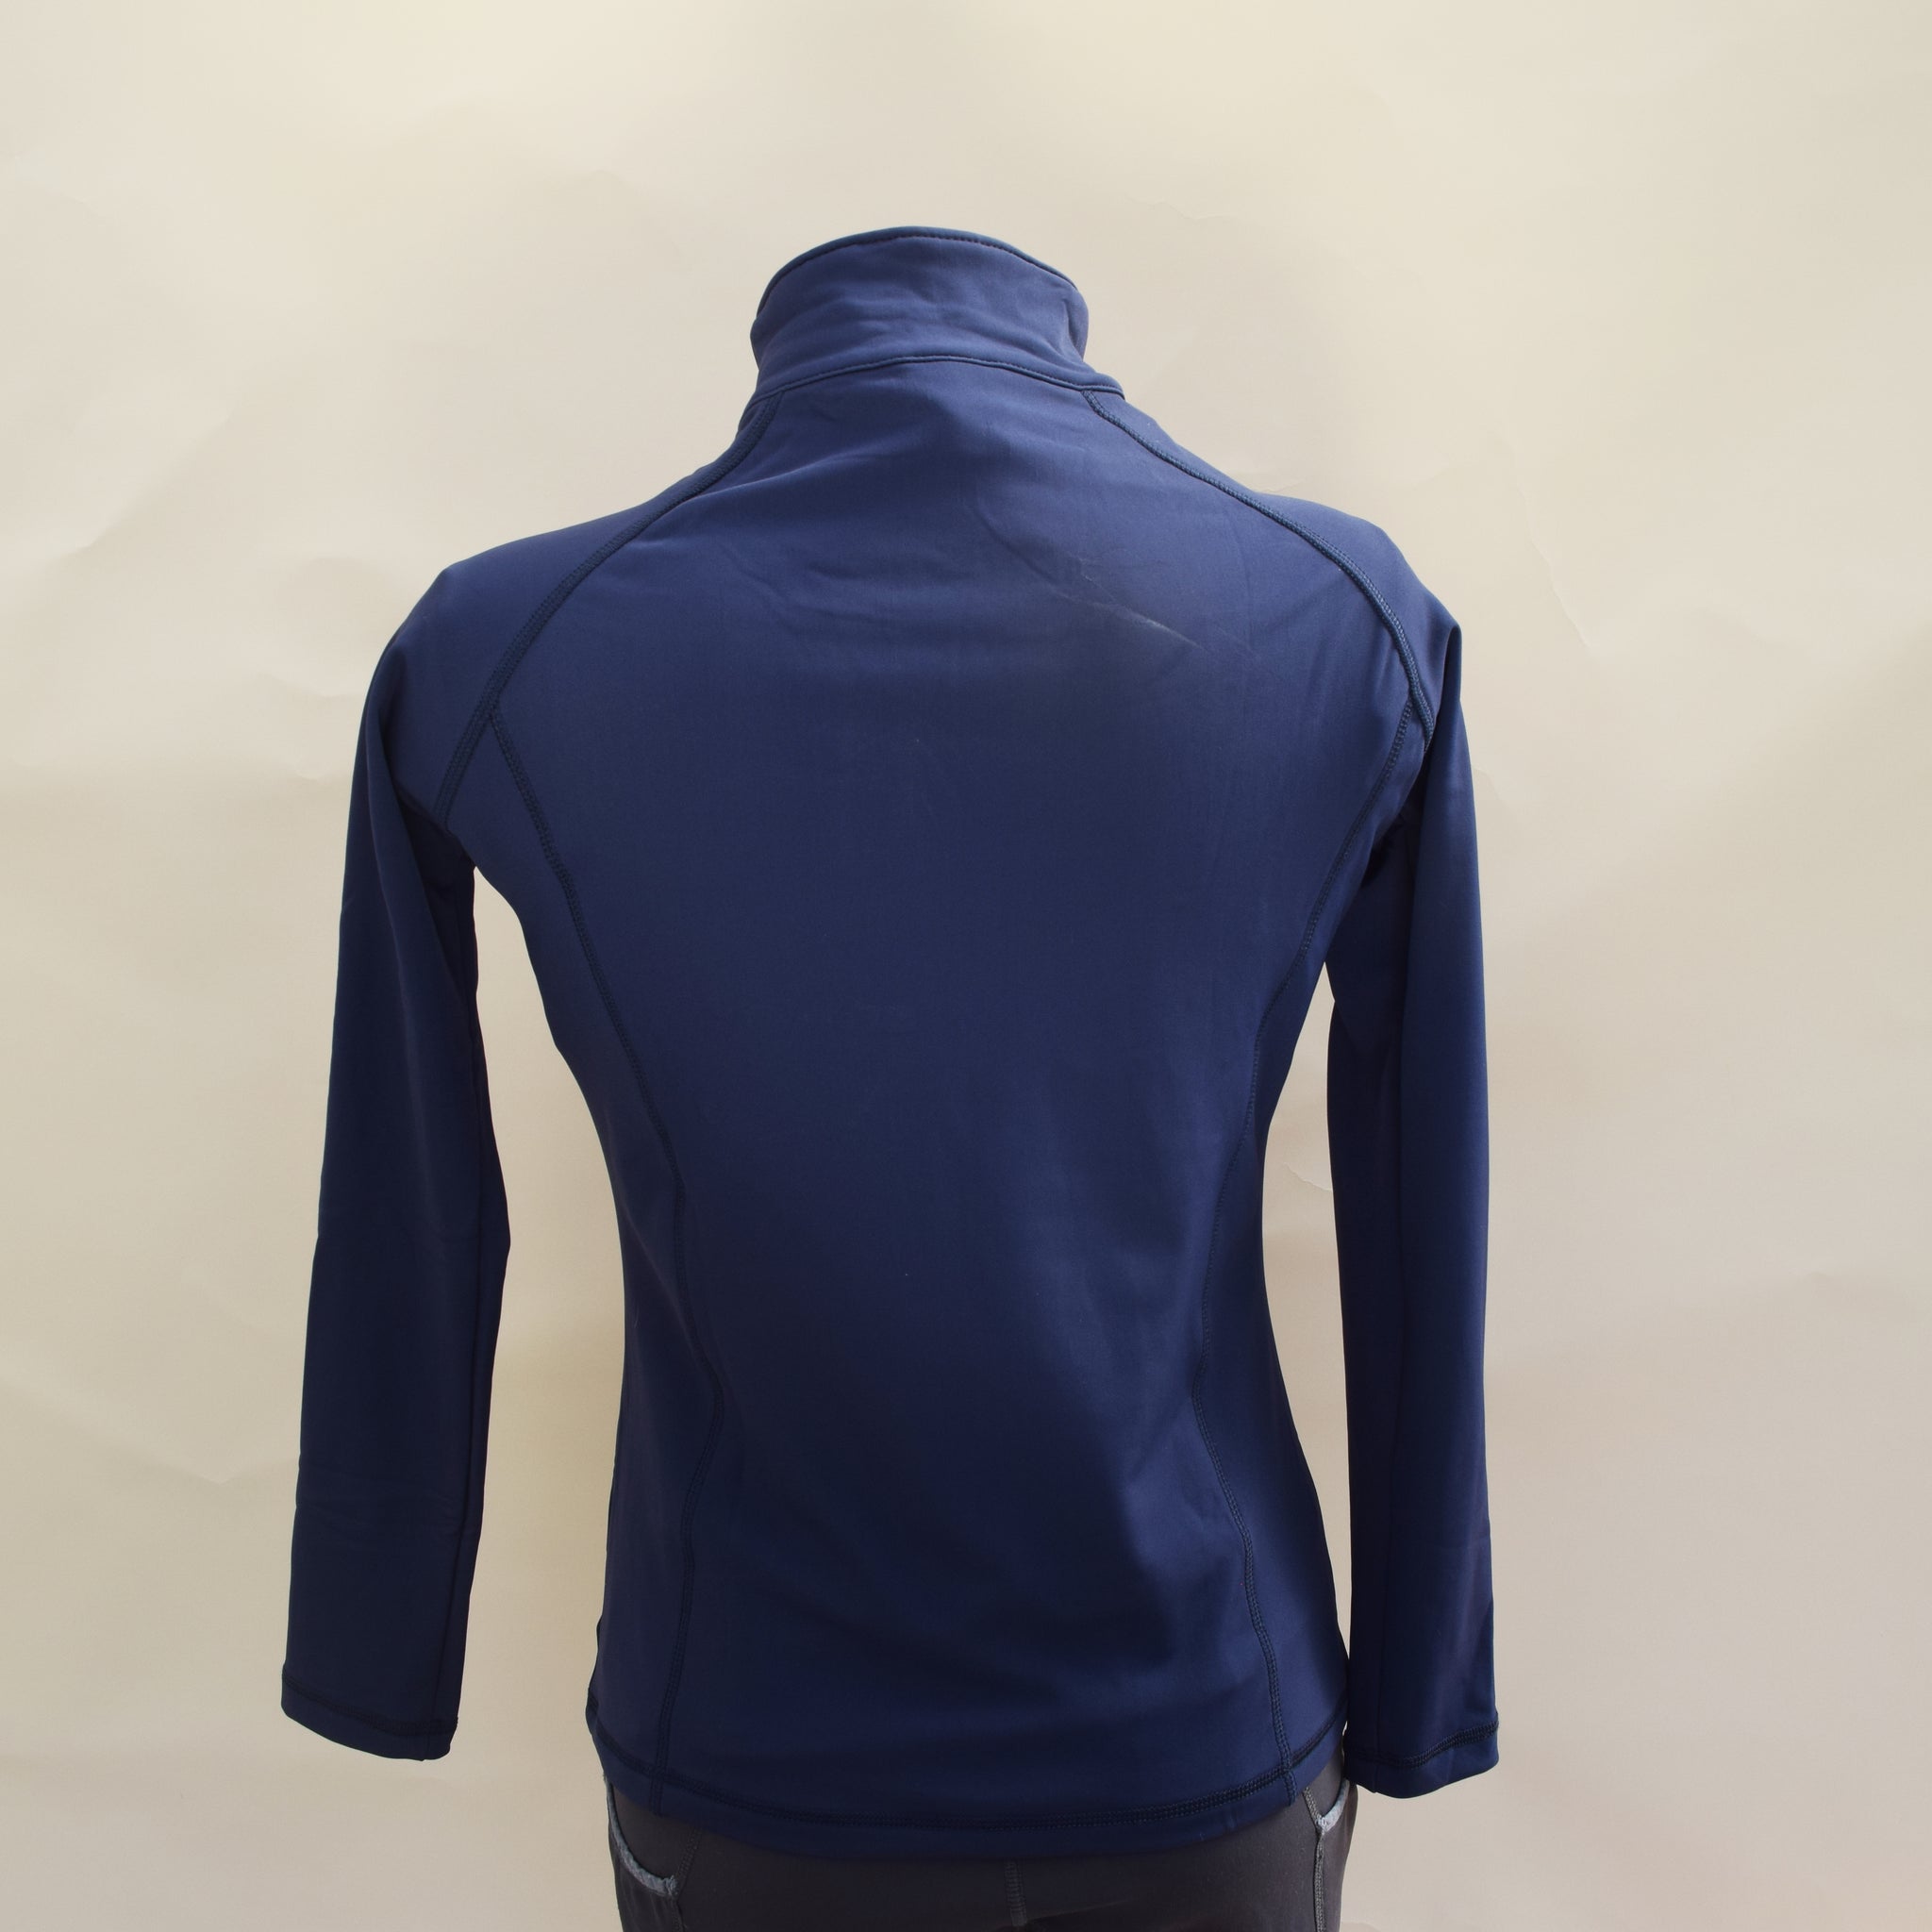 Fitted Long Sleeve Top - Navy